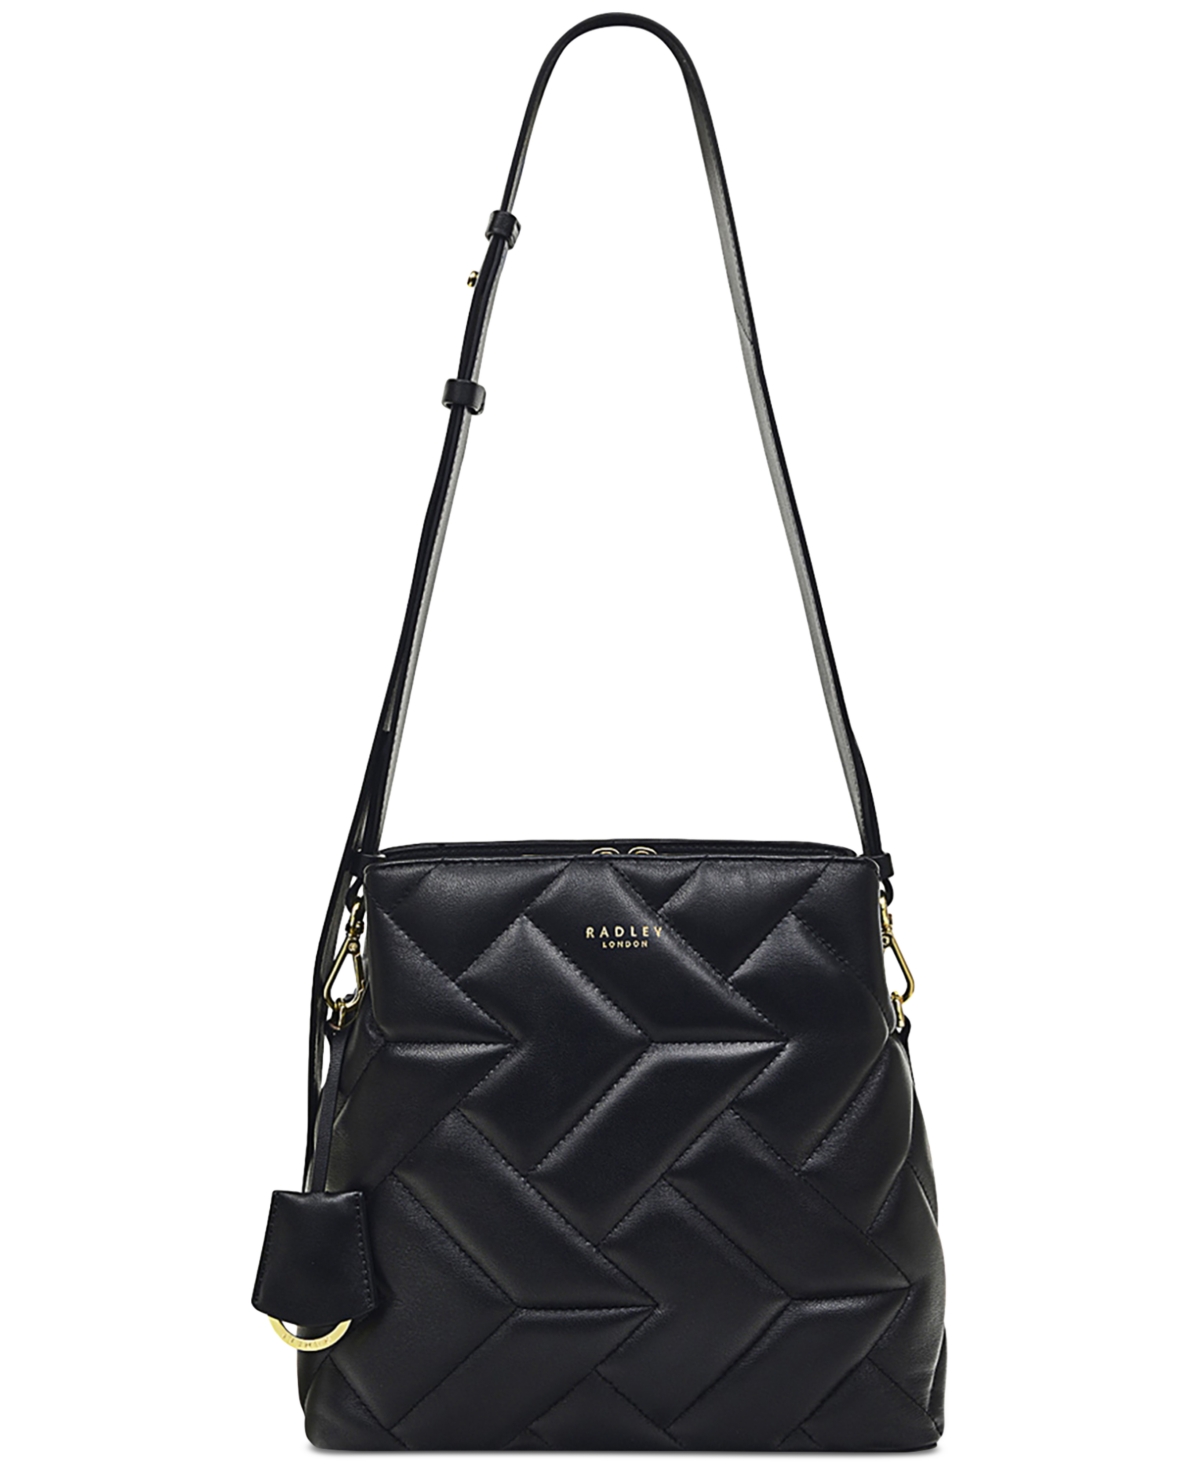 Dukes Place Small Compartment Leather Crossbody - Black